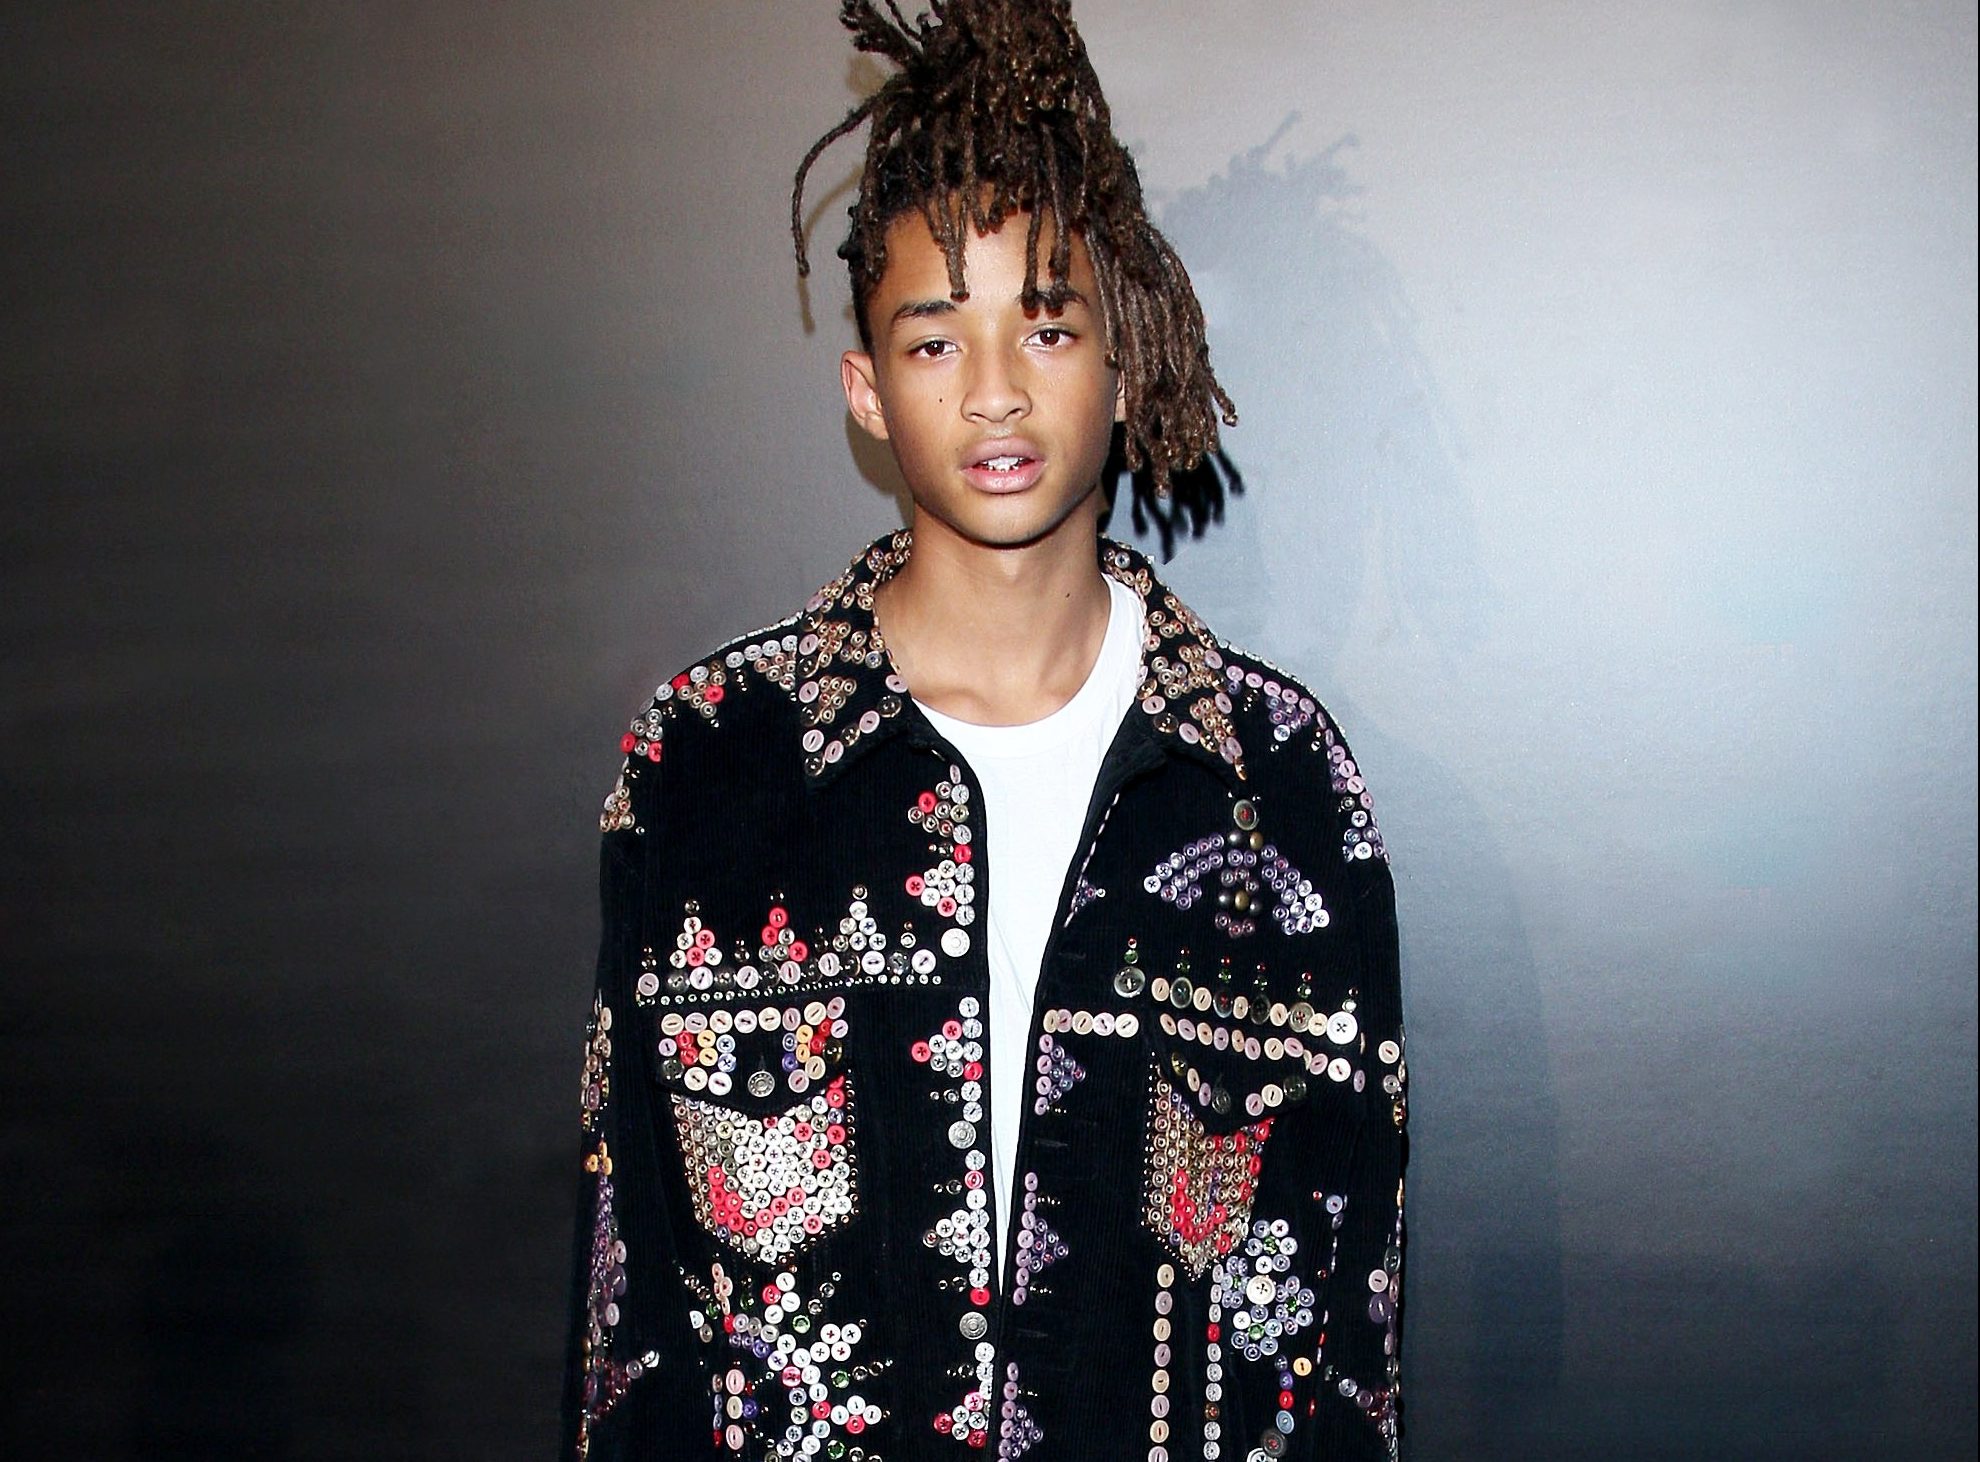 Spotted: Jaden Smith In Gucci Jacket